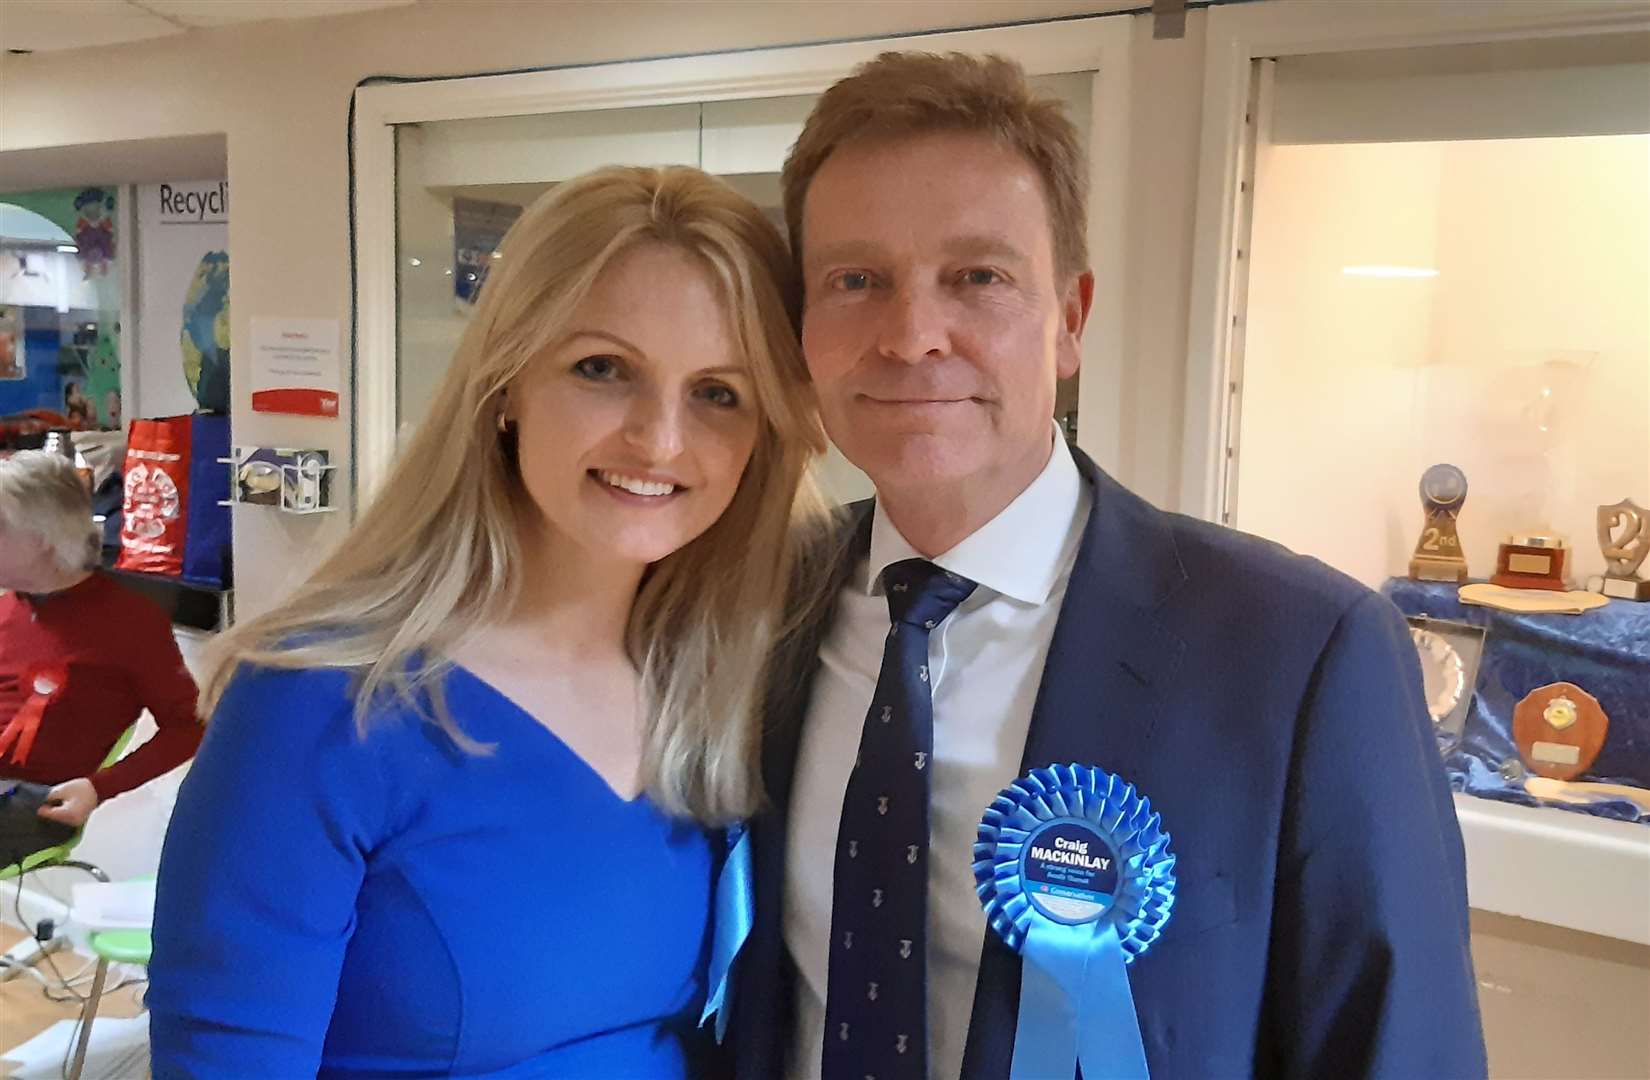 Craig Mackinlay is here at the count with wife Kati - and he's felling confident for a win